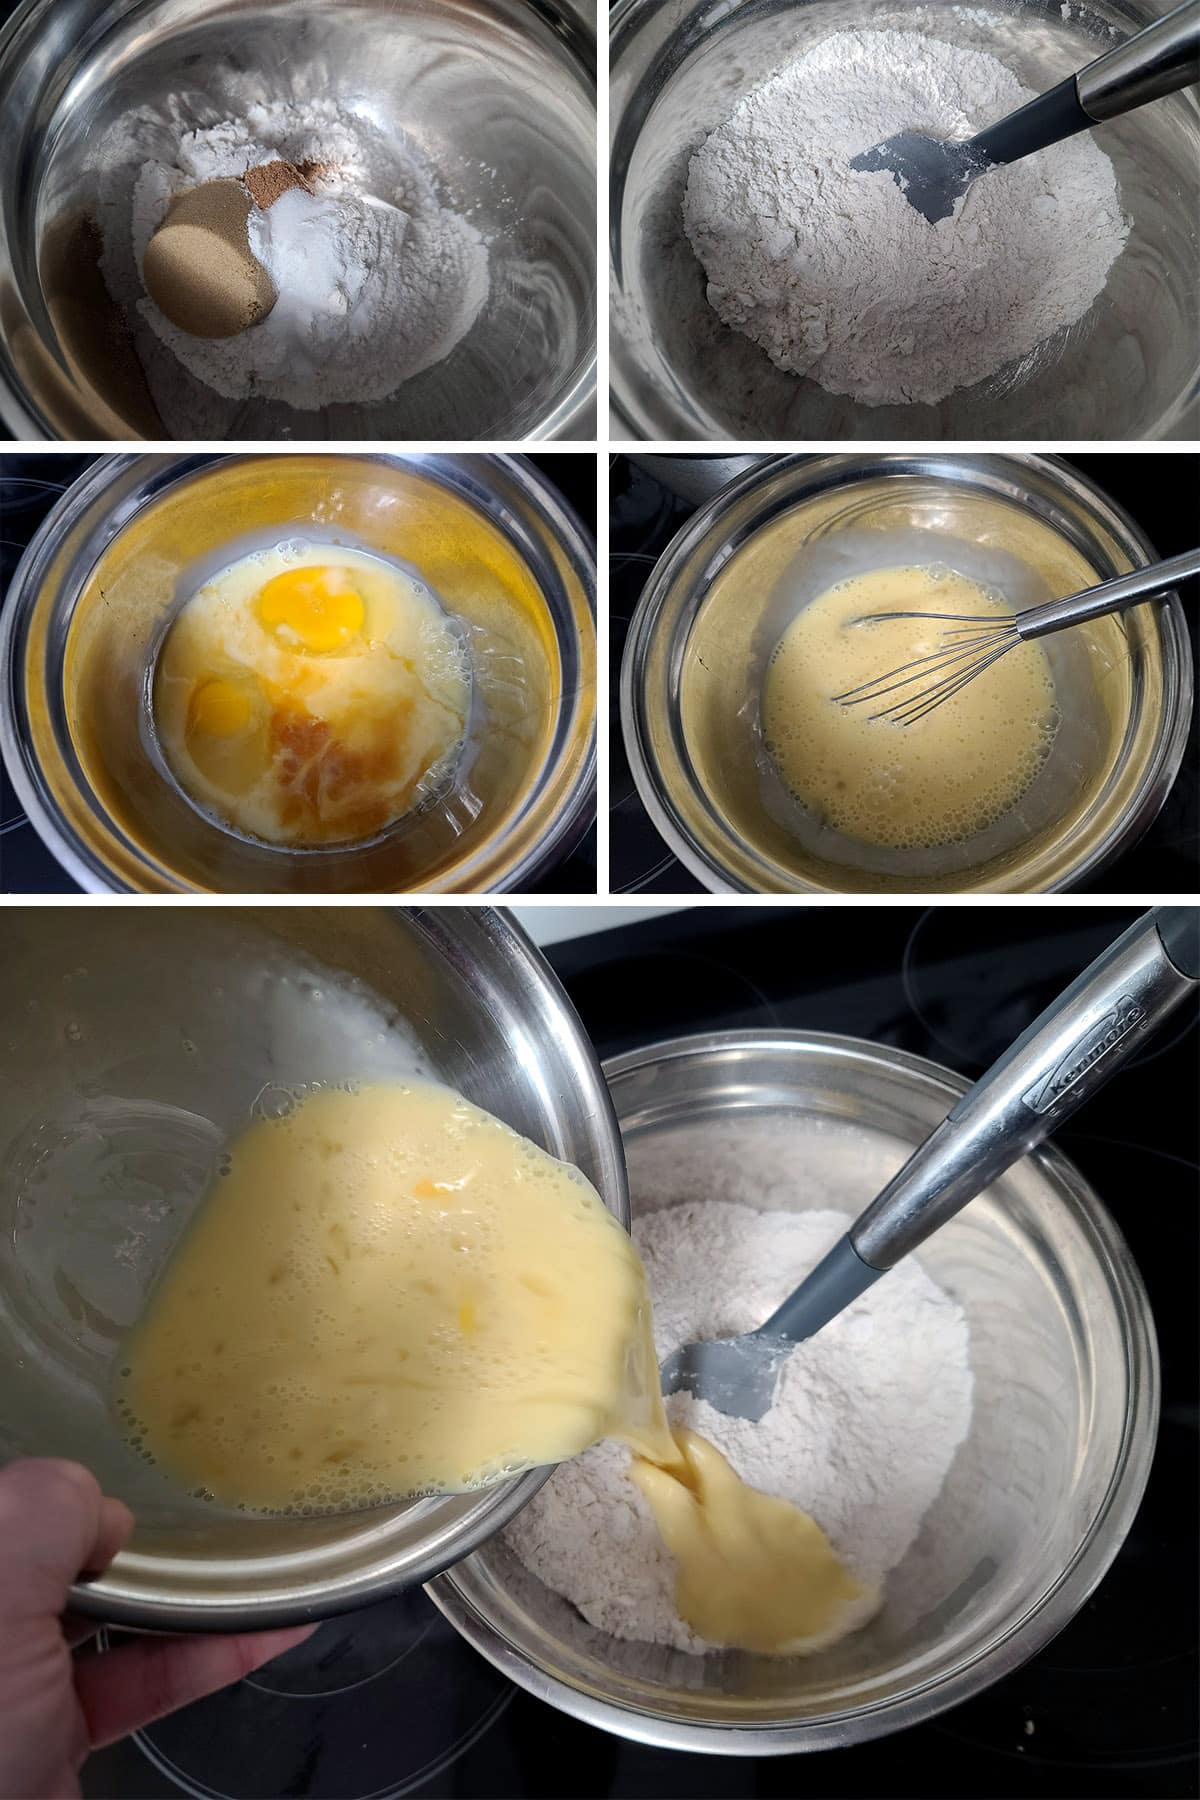 A 5 part image showing the bowl of dry ingredients being mixed, the wet ingredients being mixed, and the wet poured into the dry.